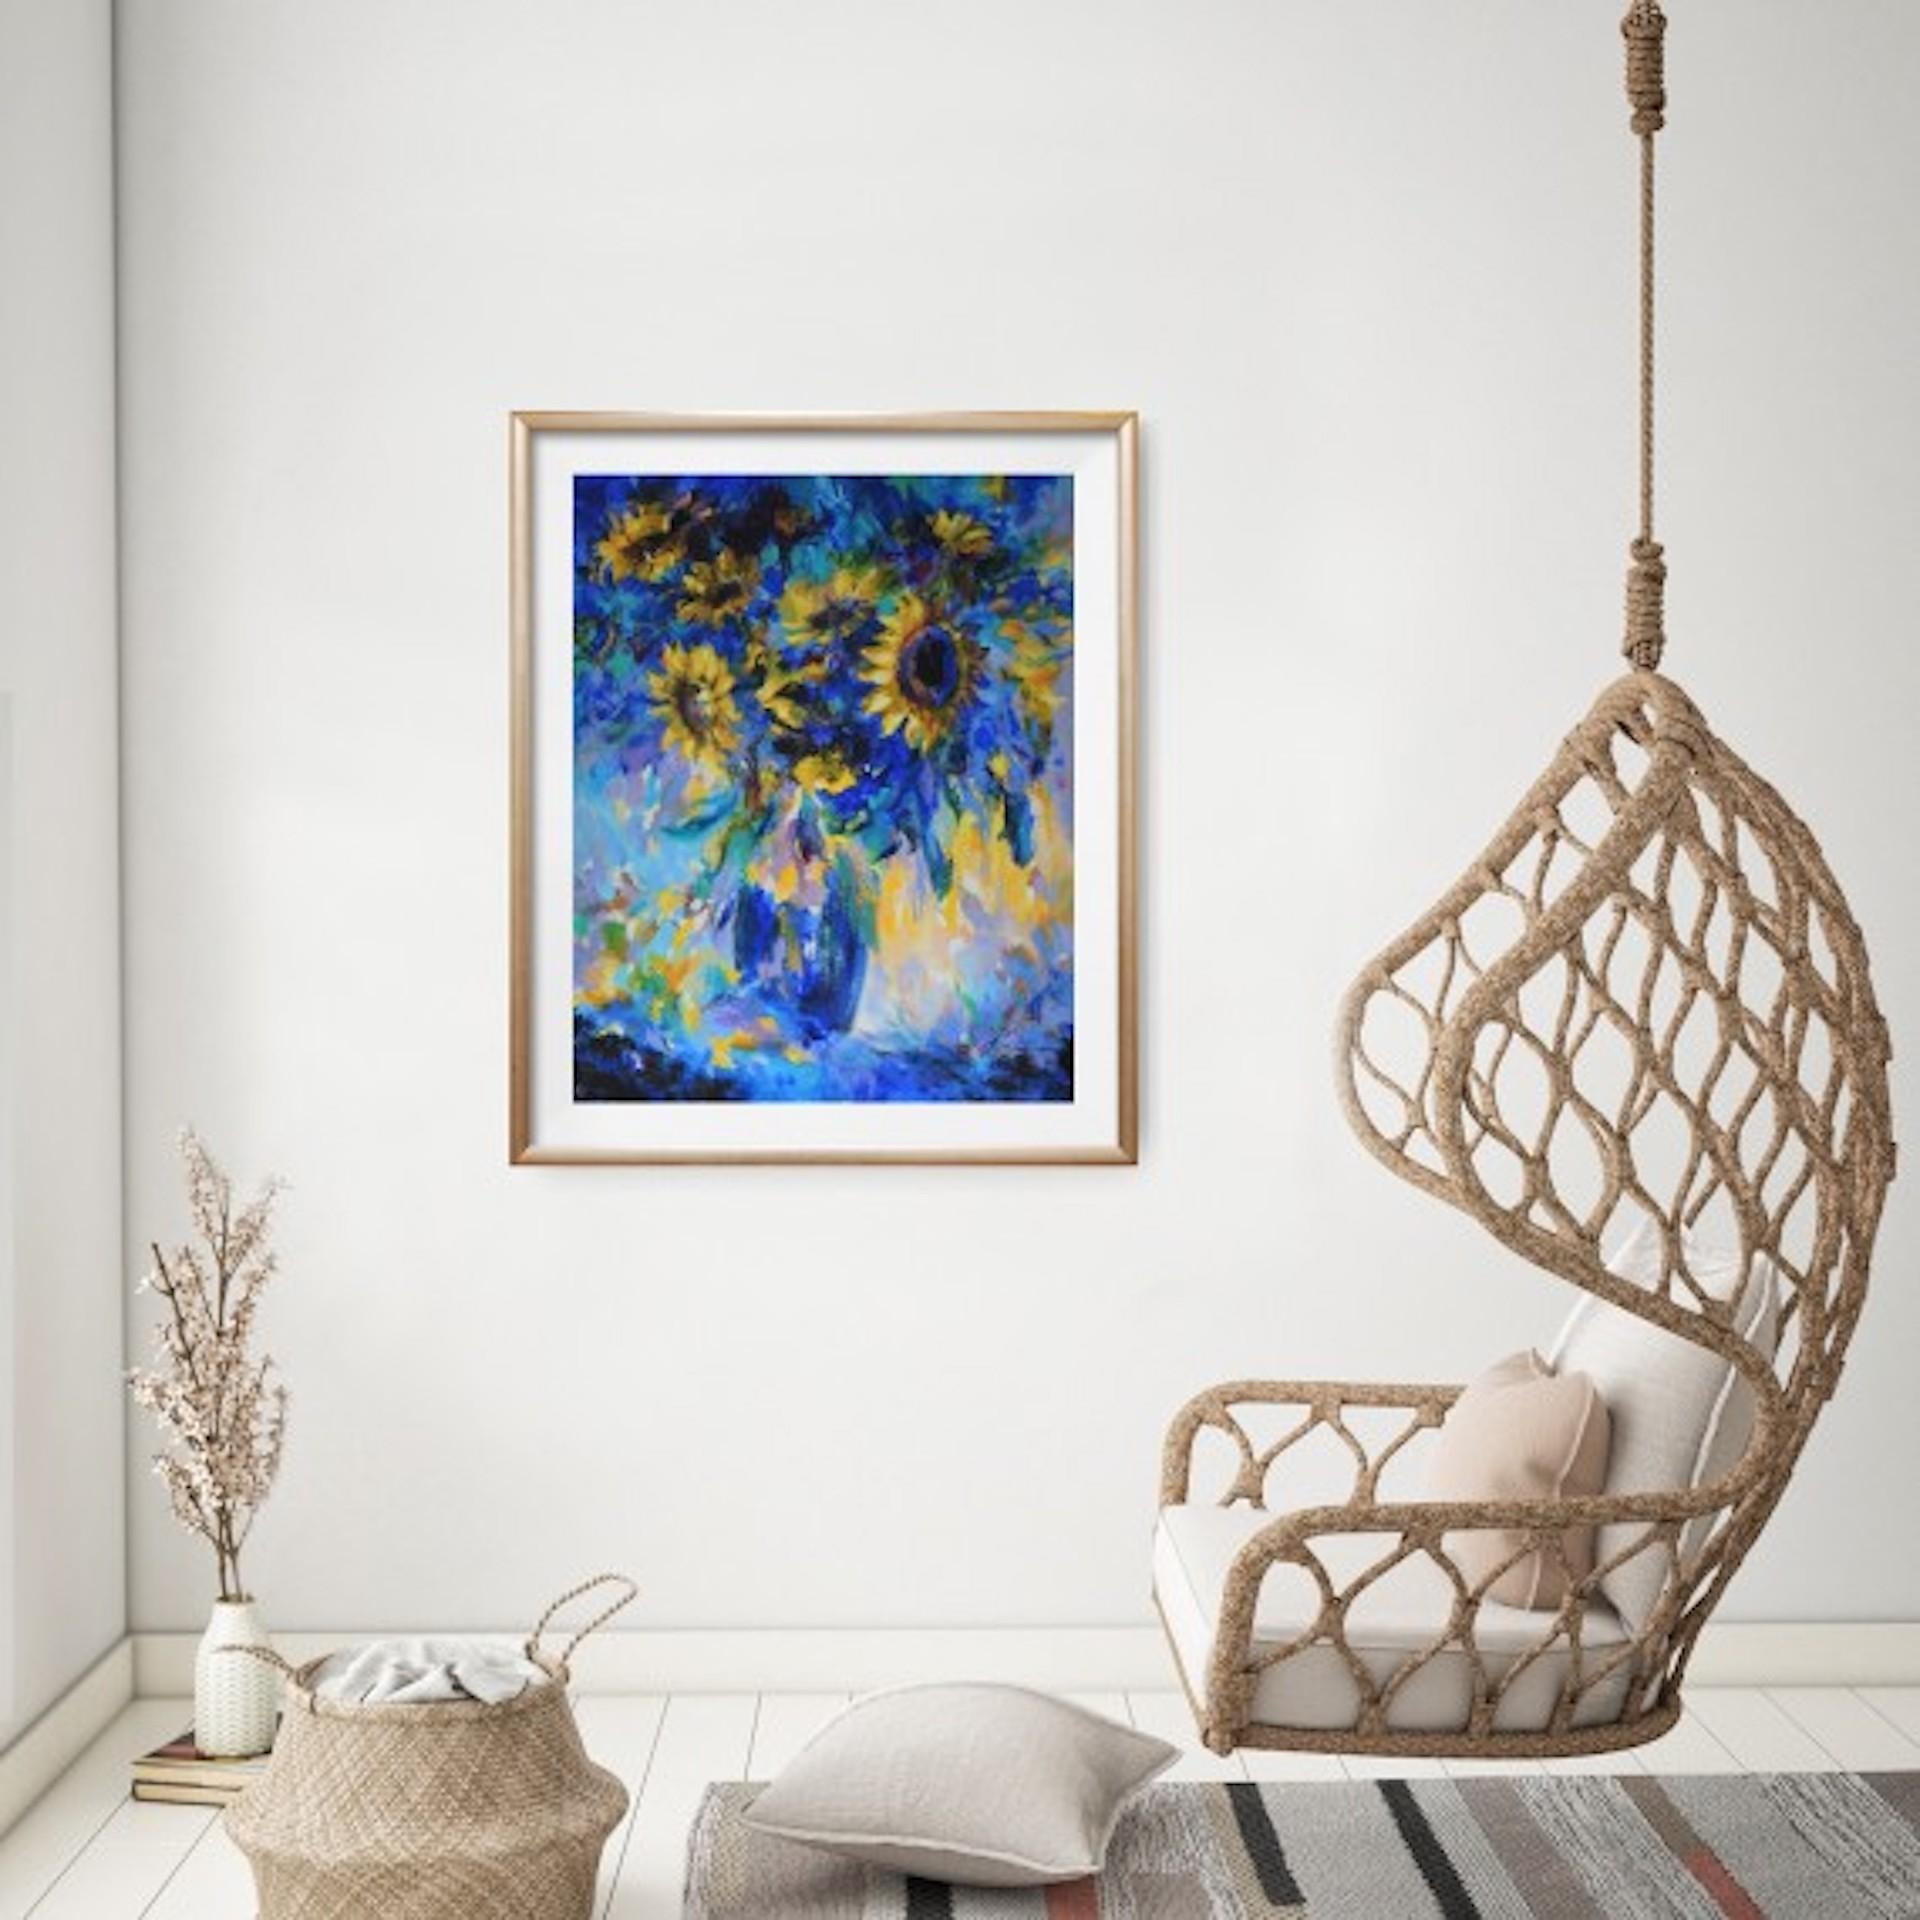 Mary Chaplin, Sun Flowers in Blue, Tribute to Vincent Van Gogh, Floral Art 1